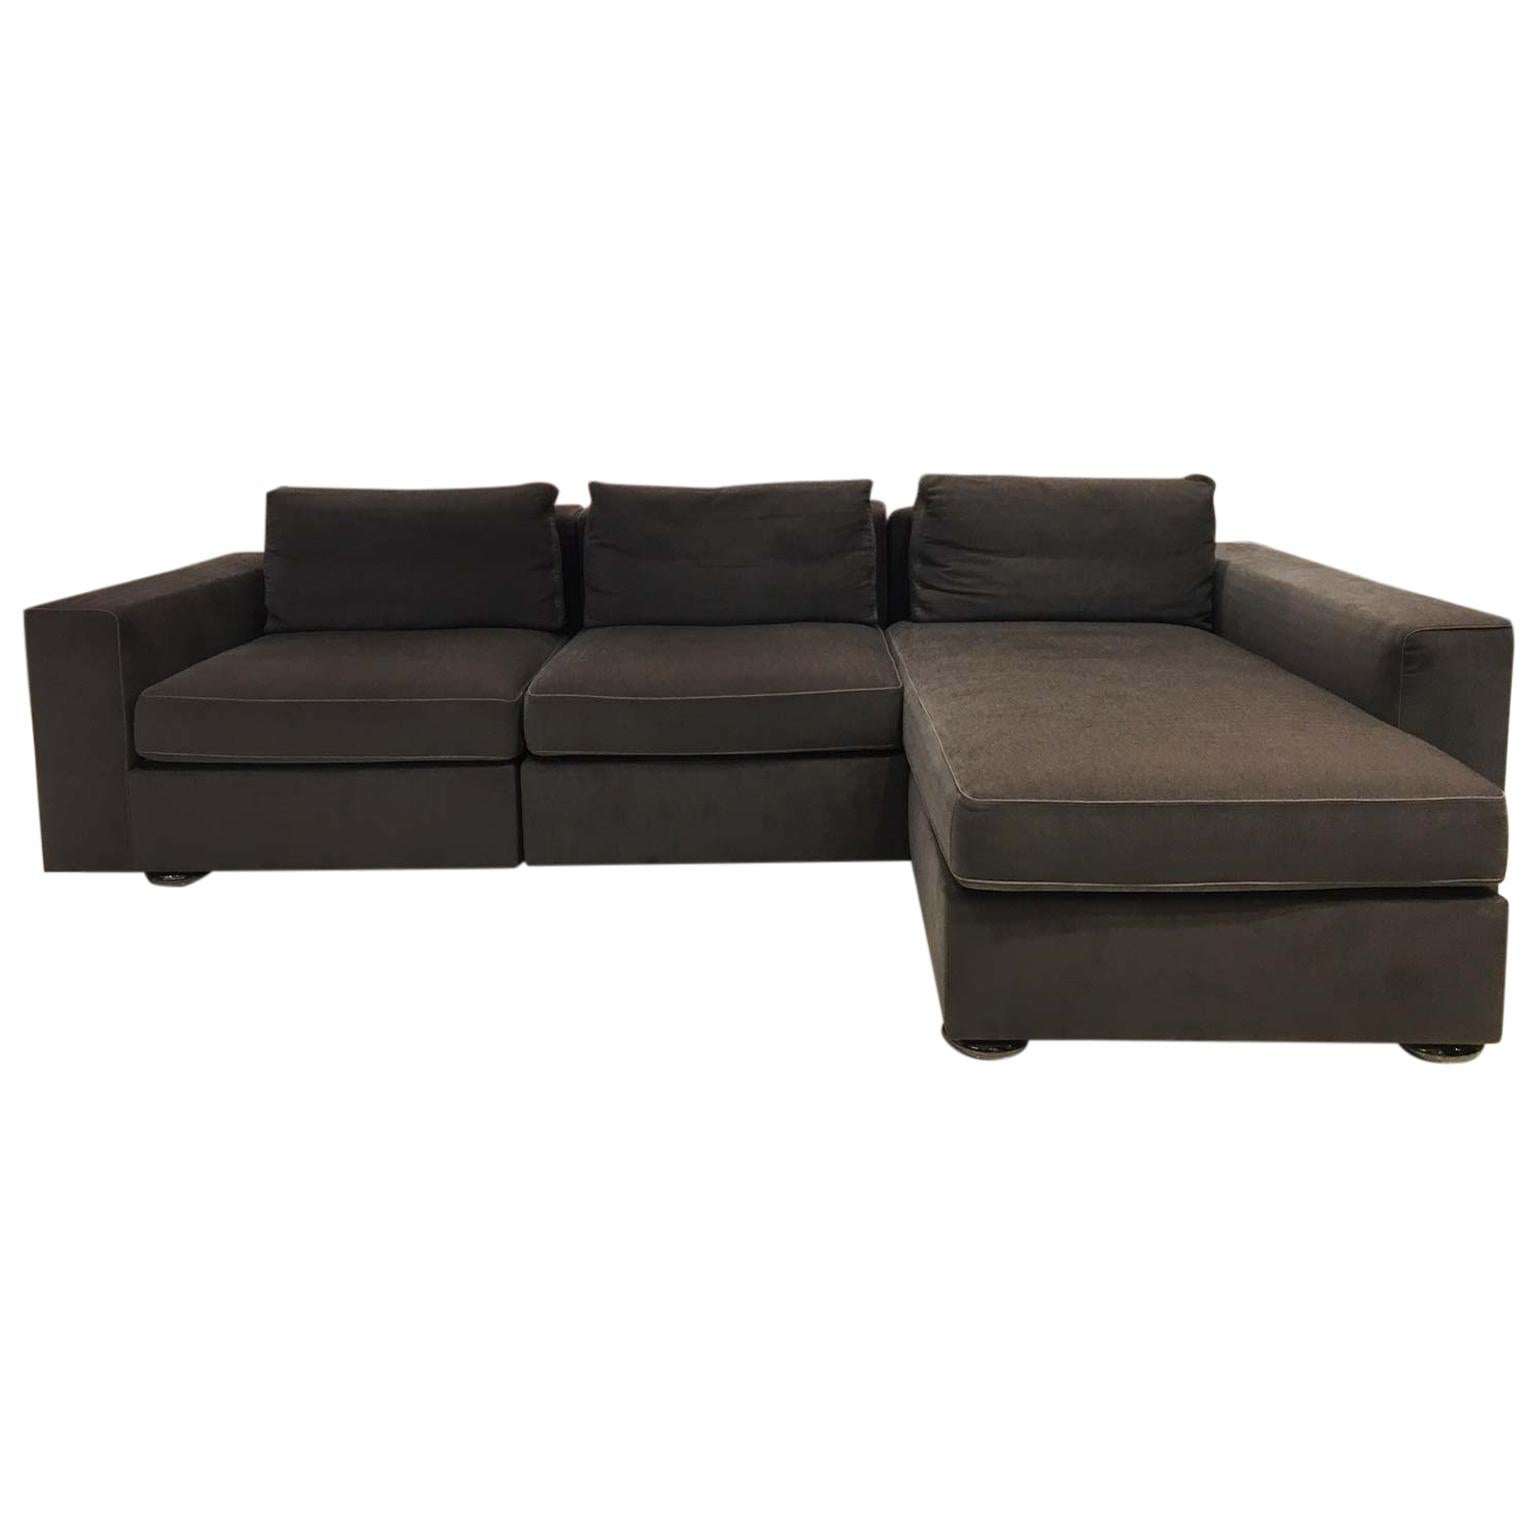 DS-247 Grey Fabric and Leather Sofa Sectional with Swivel End Piece by De Sede